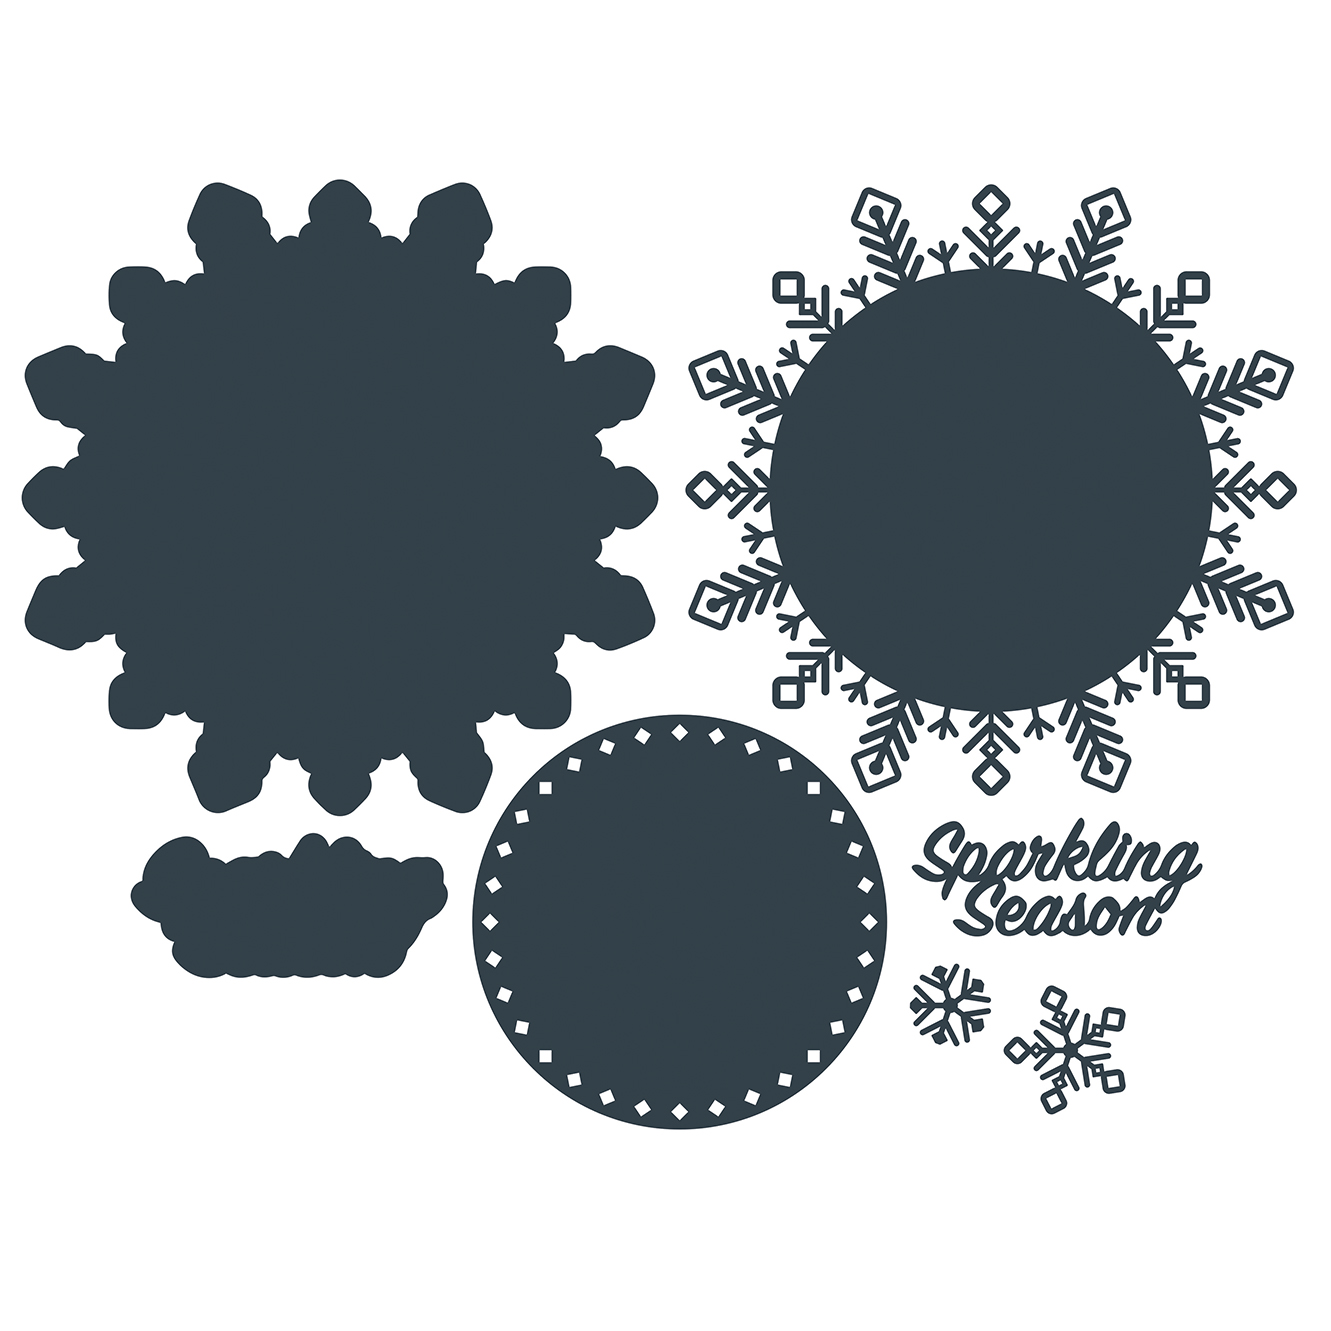 The Paper Boutique - Sparkling Season Cutting Die